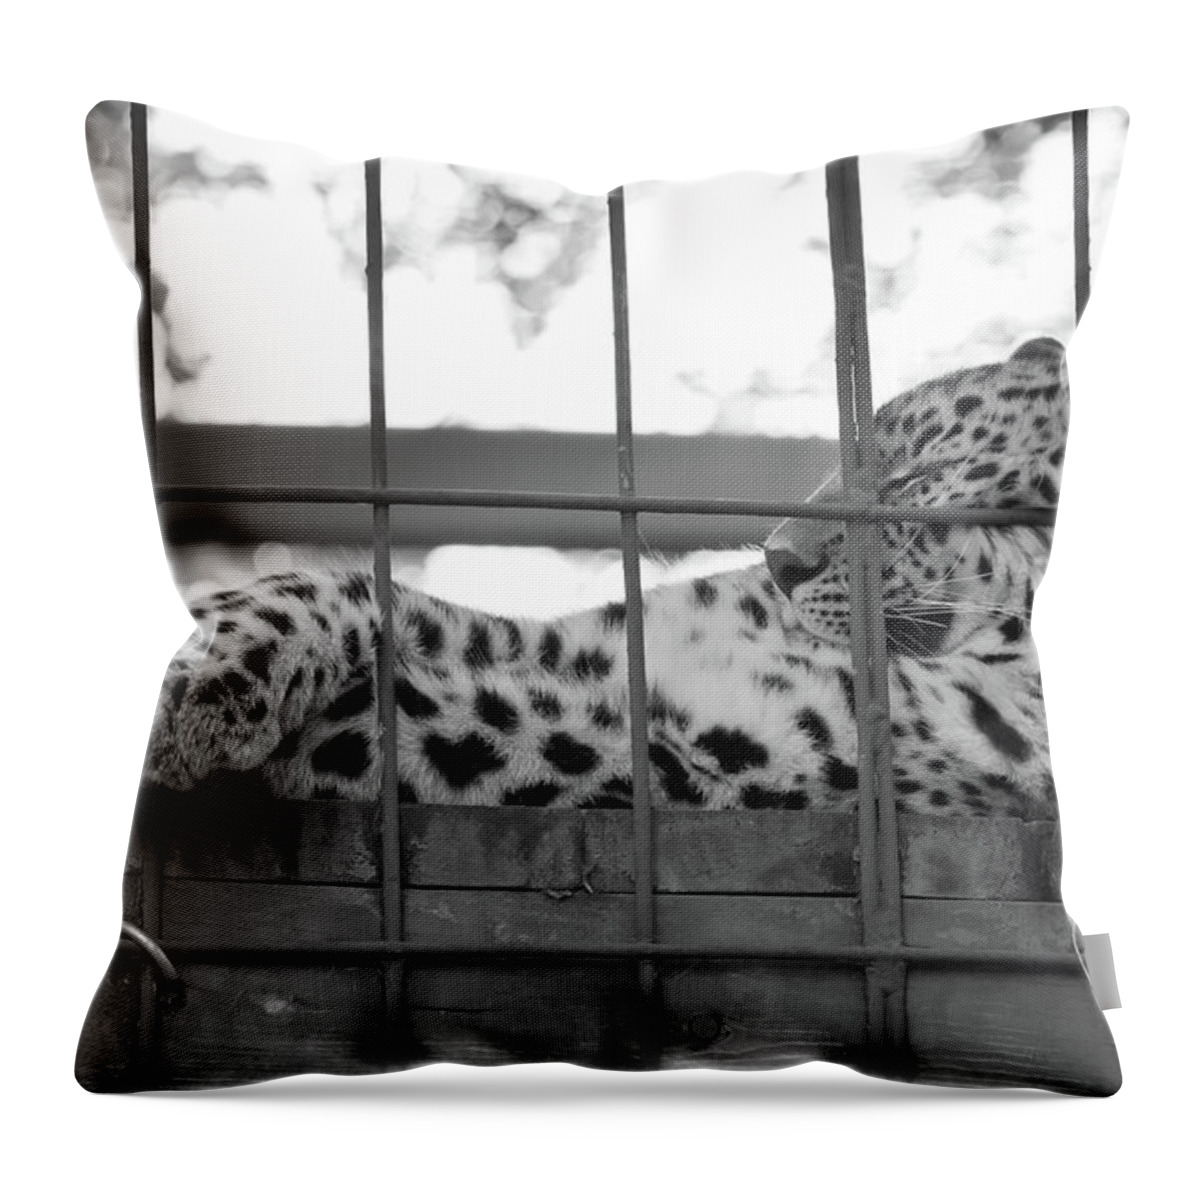 Zoo Throw Pillow featuring the photograph Lazy by Melissa Leda